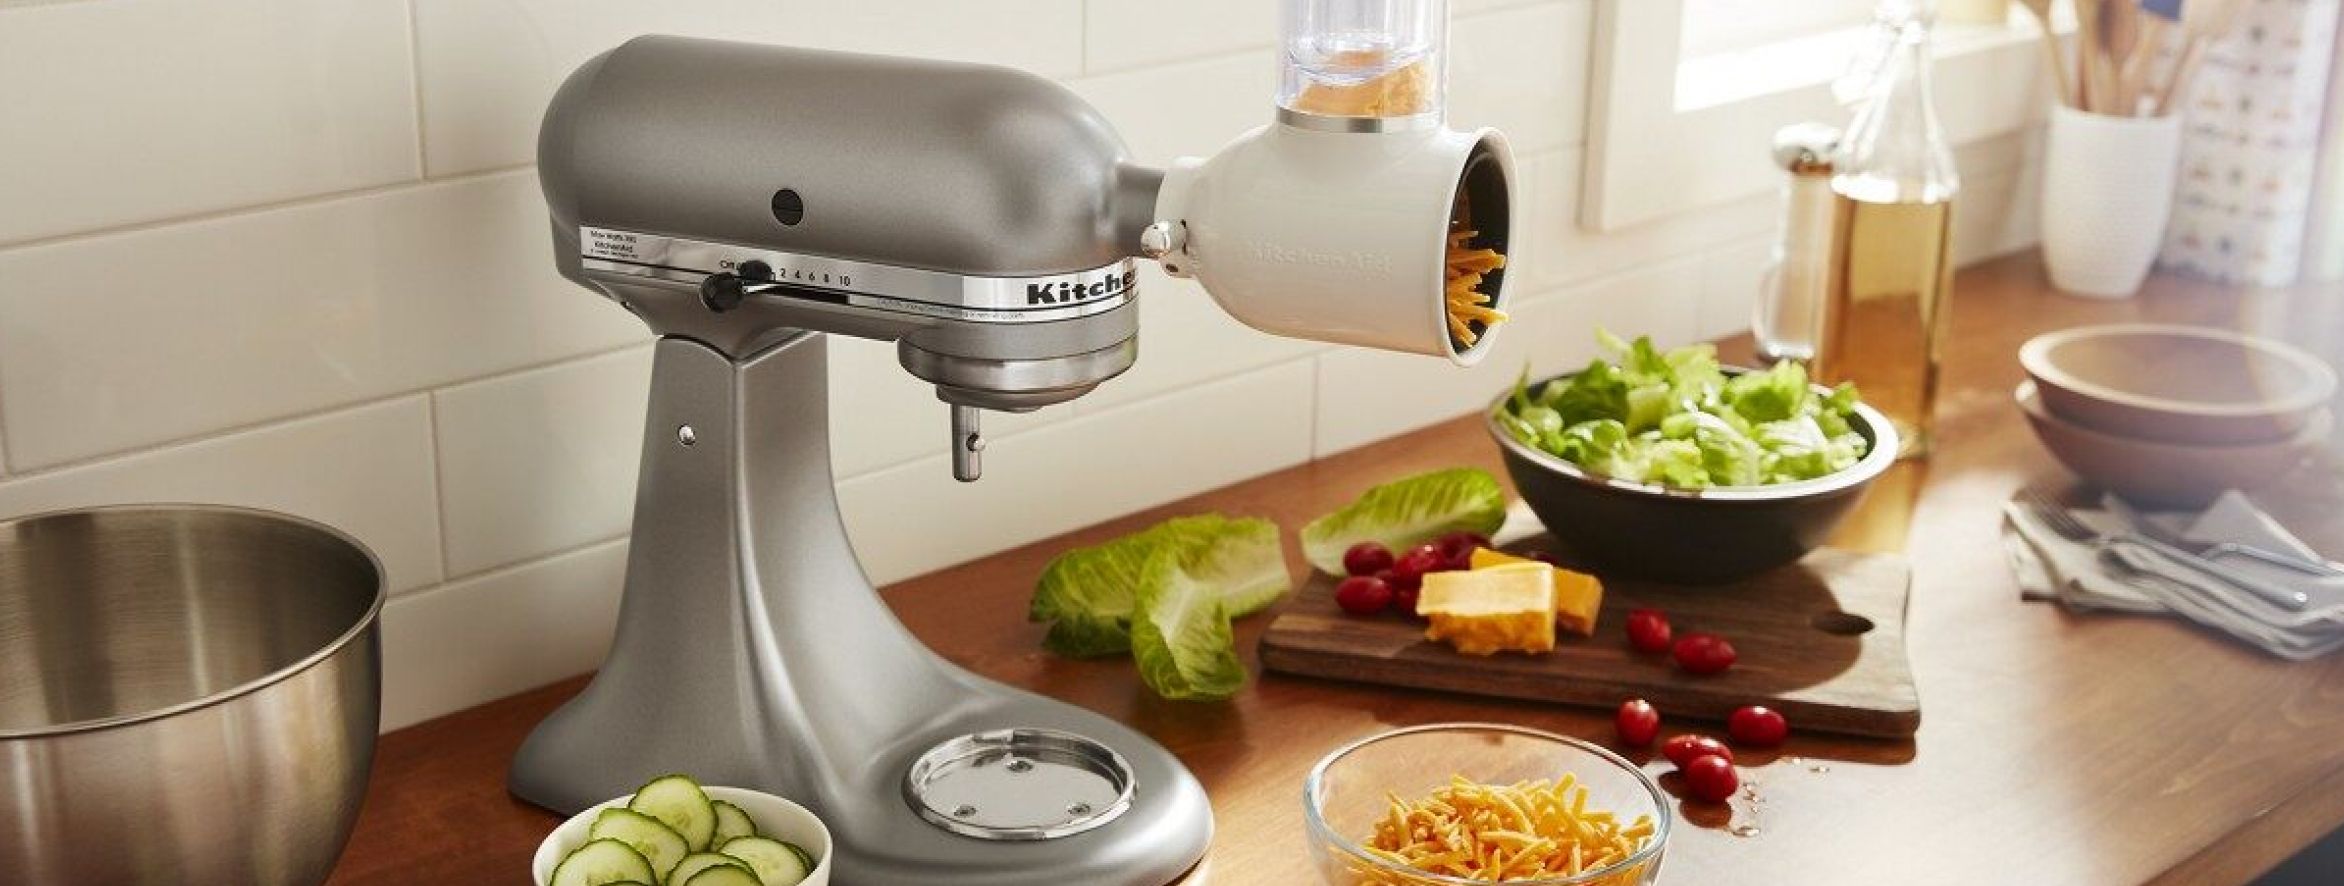 Stand Mixer Attachment Buying Guide   KitchenAid